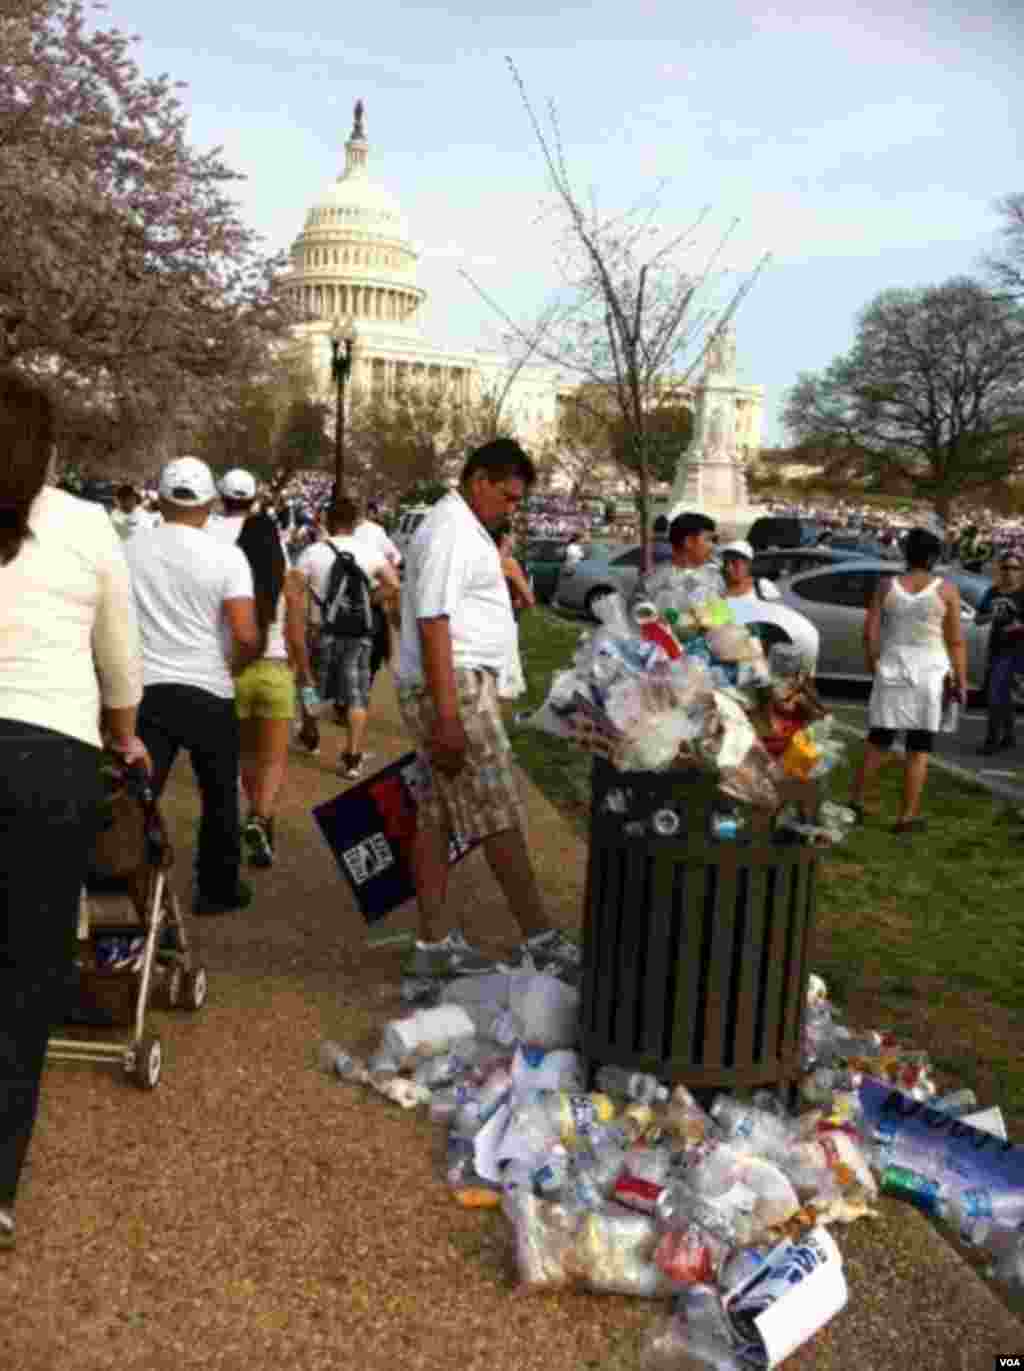 Water bottles and campaign posters litter the ground around a trash can at the pro-immigration rally on Capital Hill. (Photo by Carolyn Presutti)